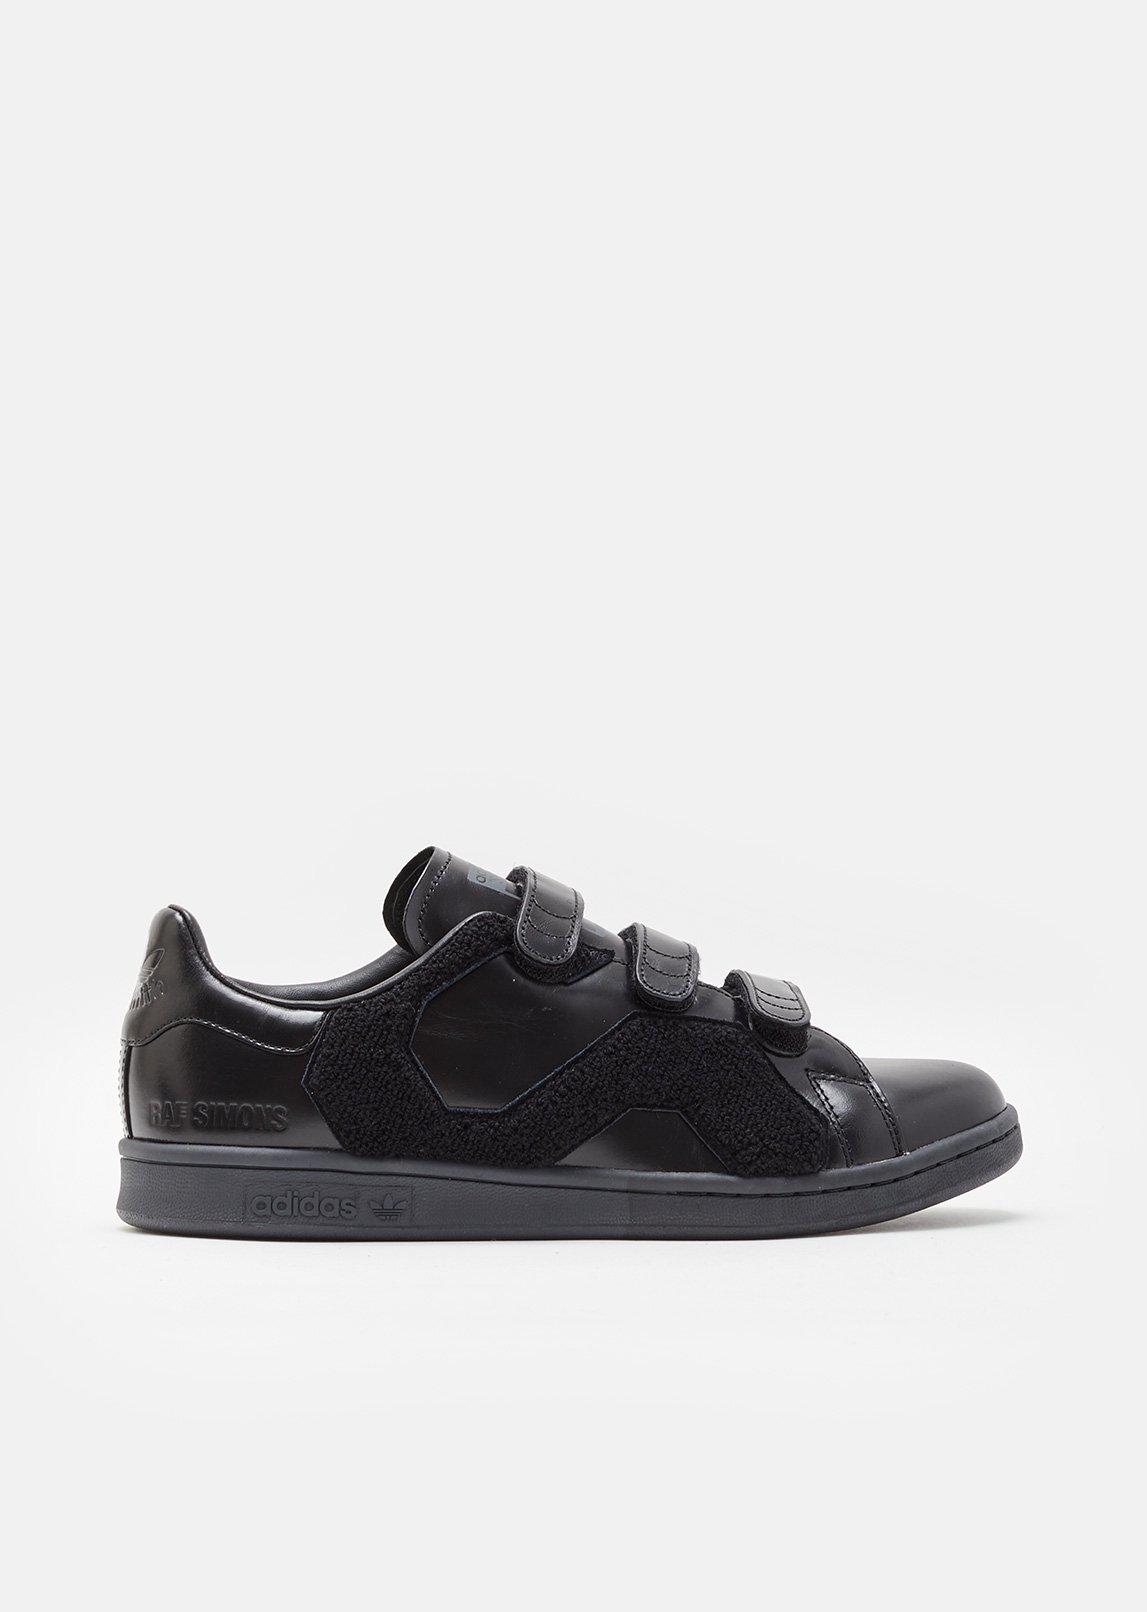 adidas By Raf Simons Leather Stan Smith Velcro Sneakers in Black - Lyst